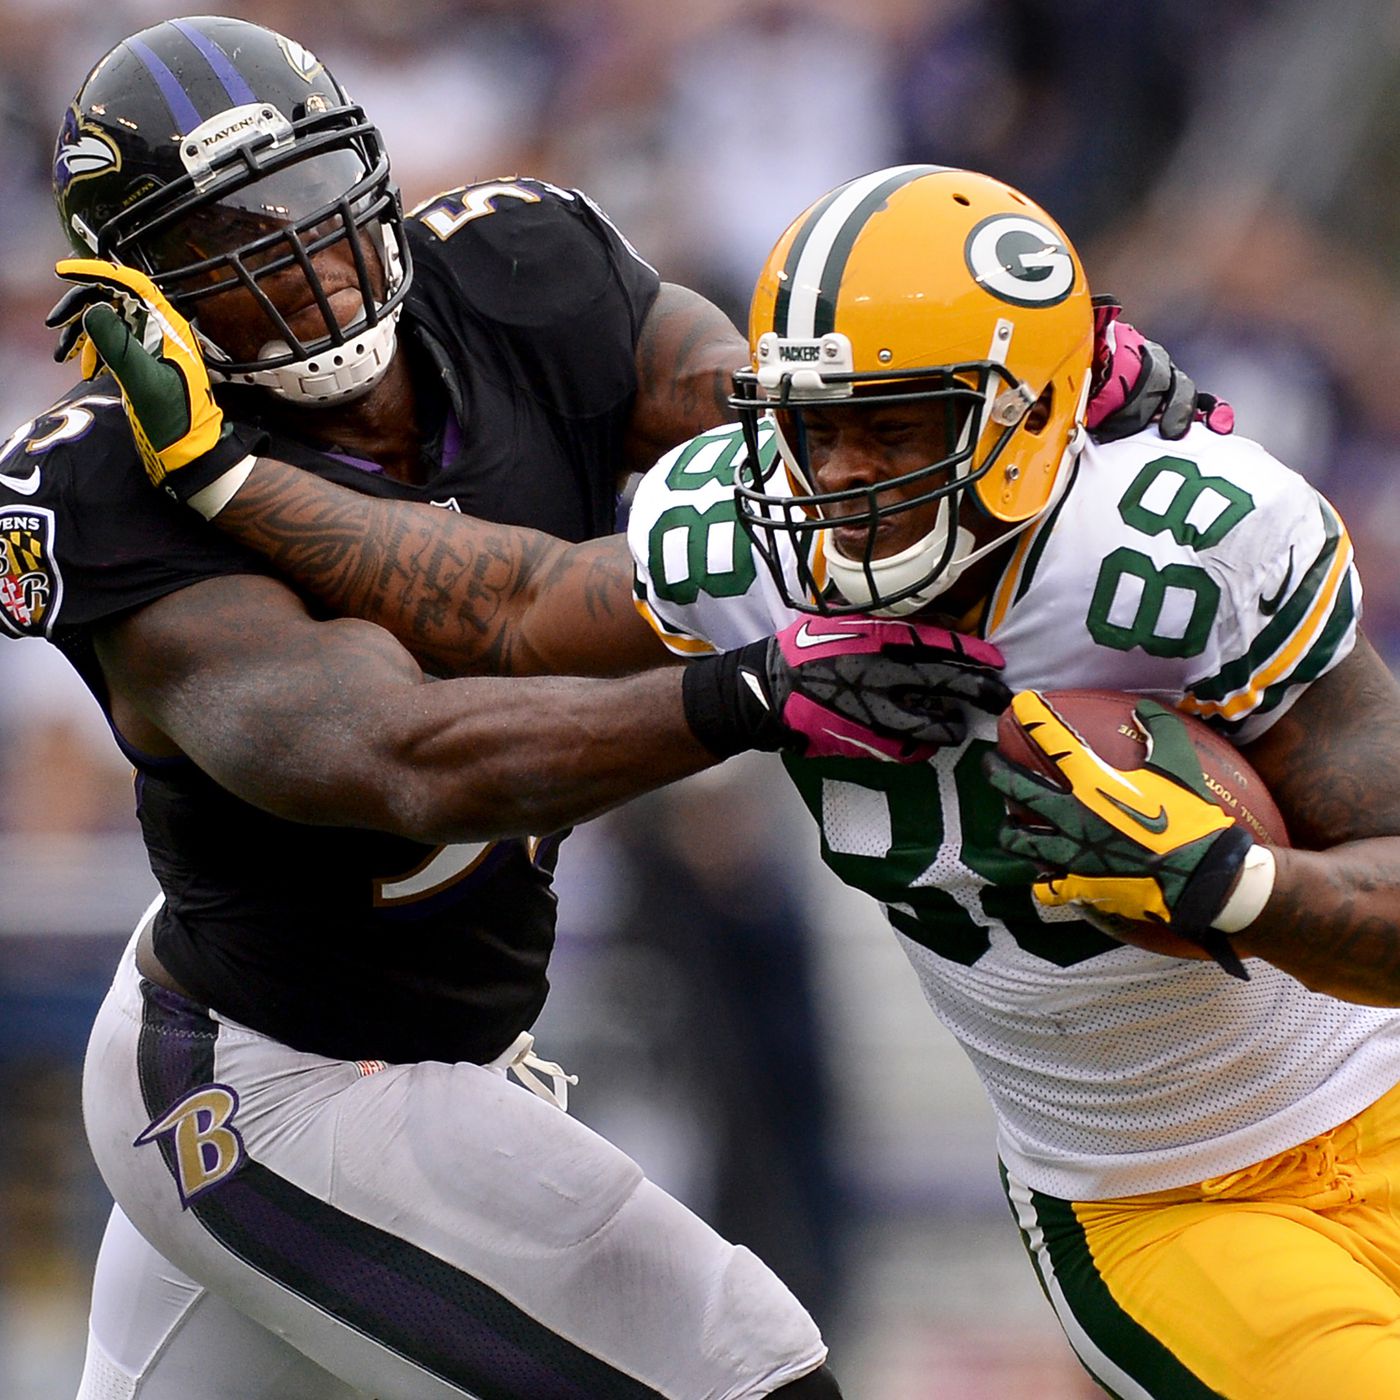 Report: Packers to release Jermichael Finley after the 2012 season